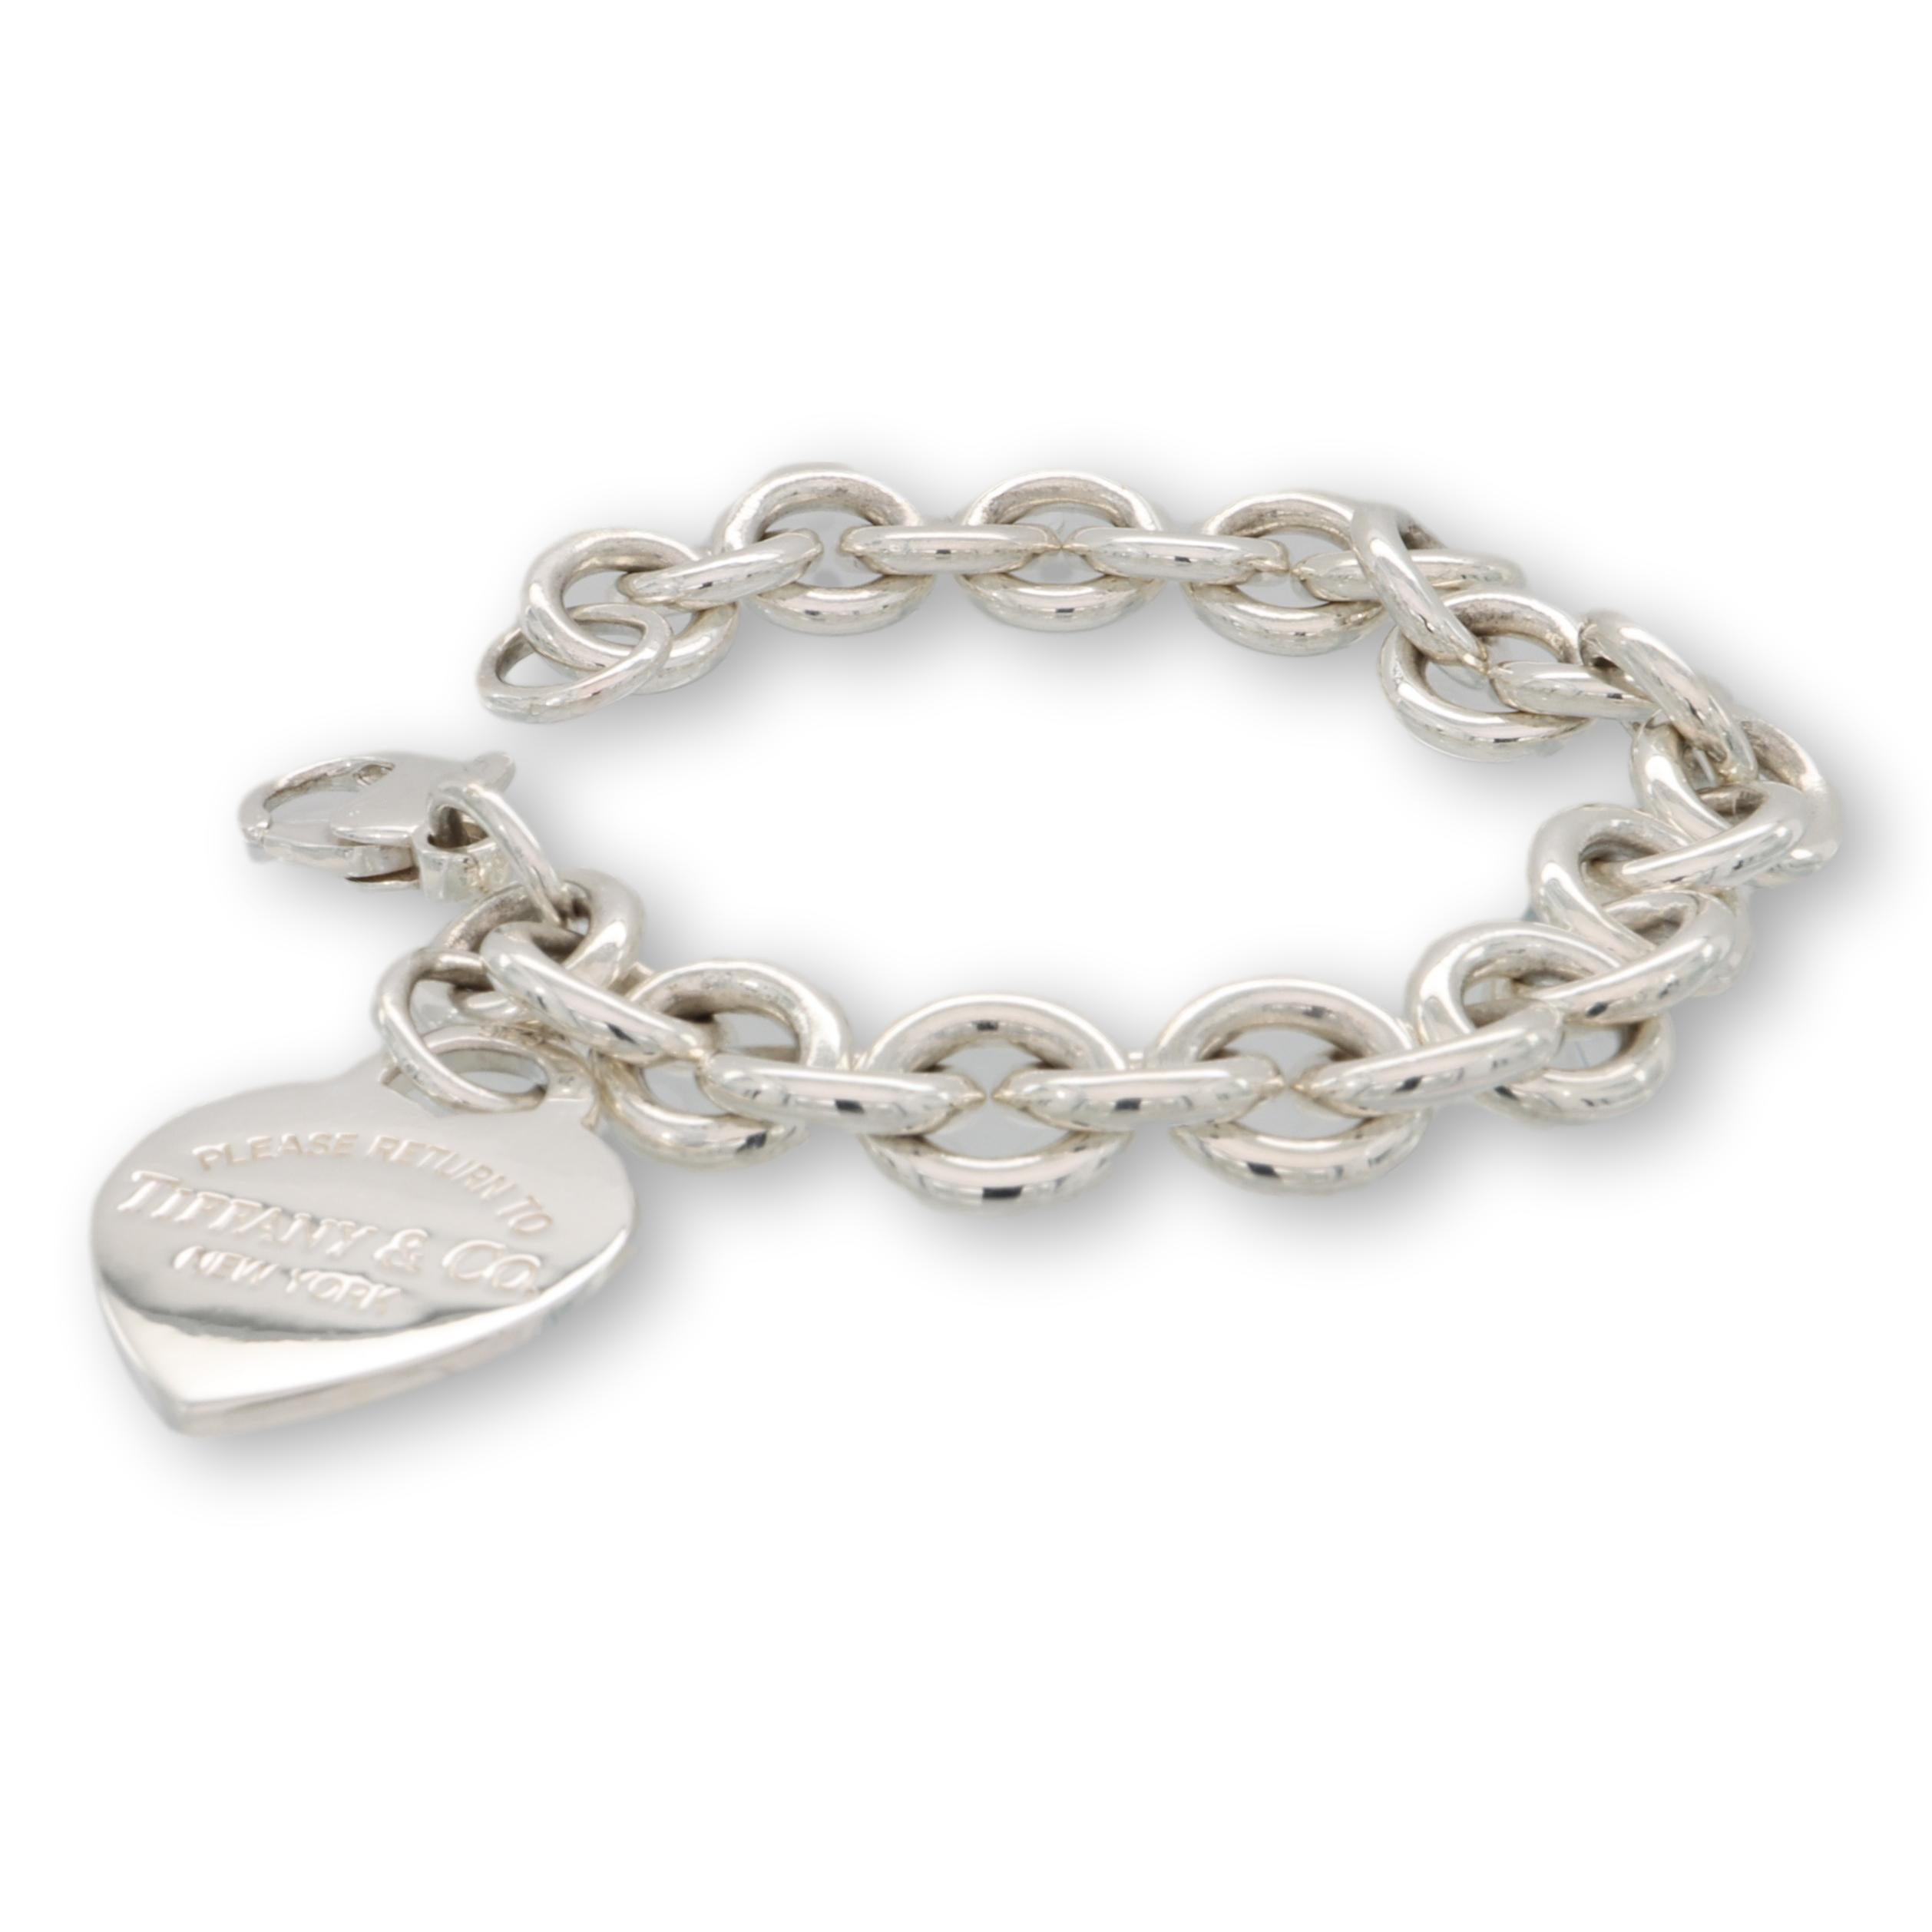 Tiffany & Co. link bracelet from the Return to Tiffany collection finely crafted in fine Sterling Silver featuring a heart Tiffany logo charm hanging off a 7